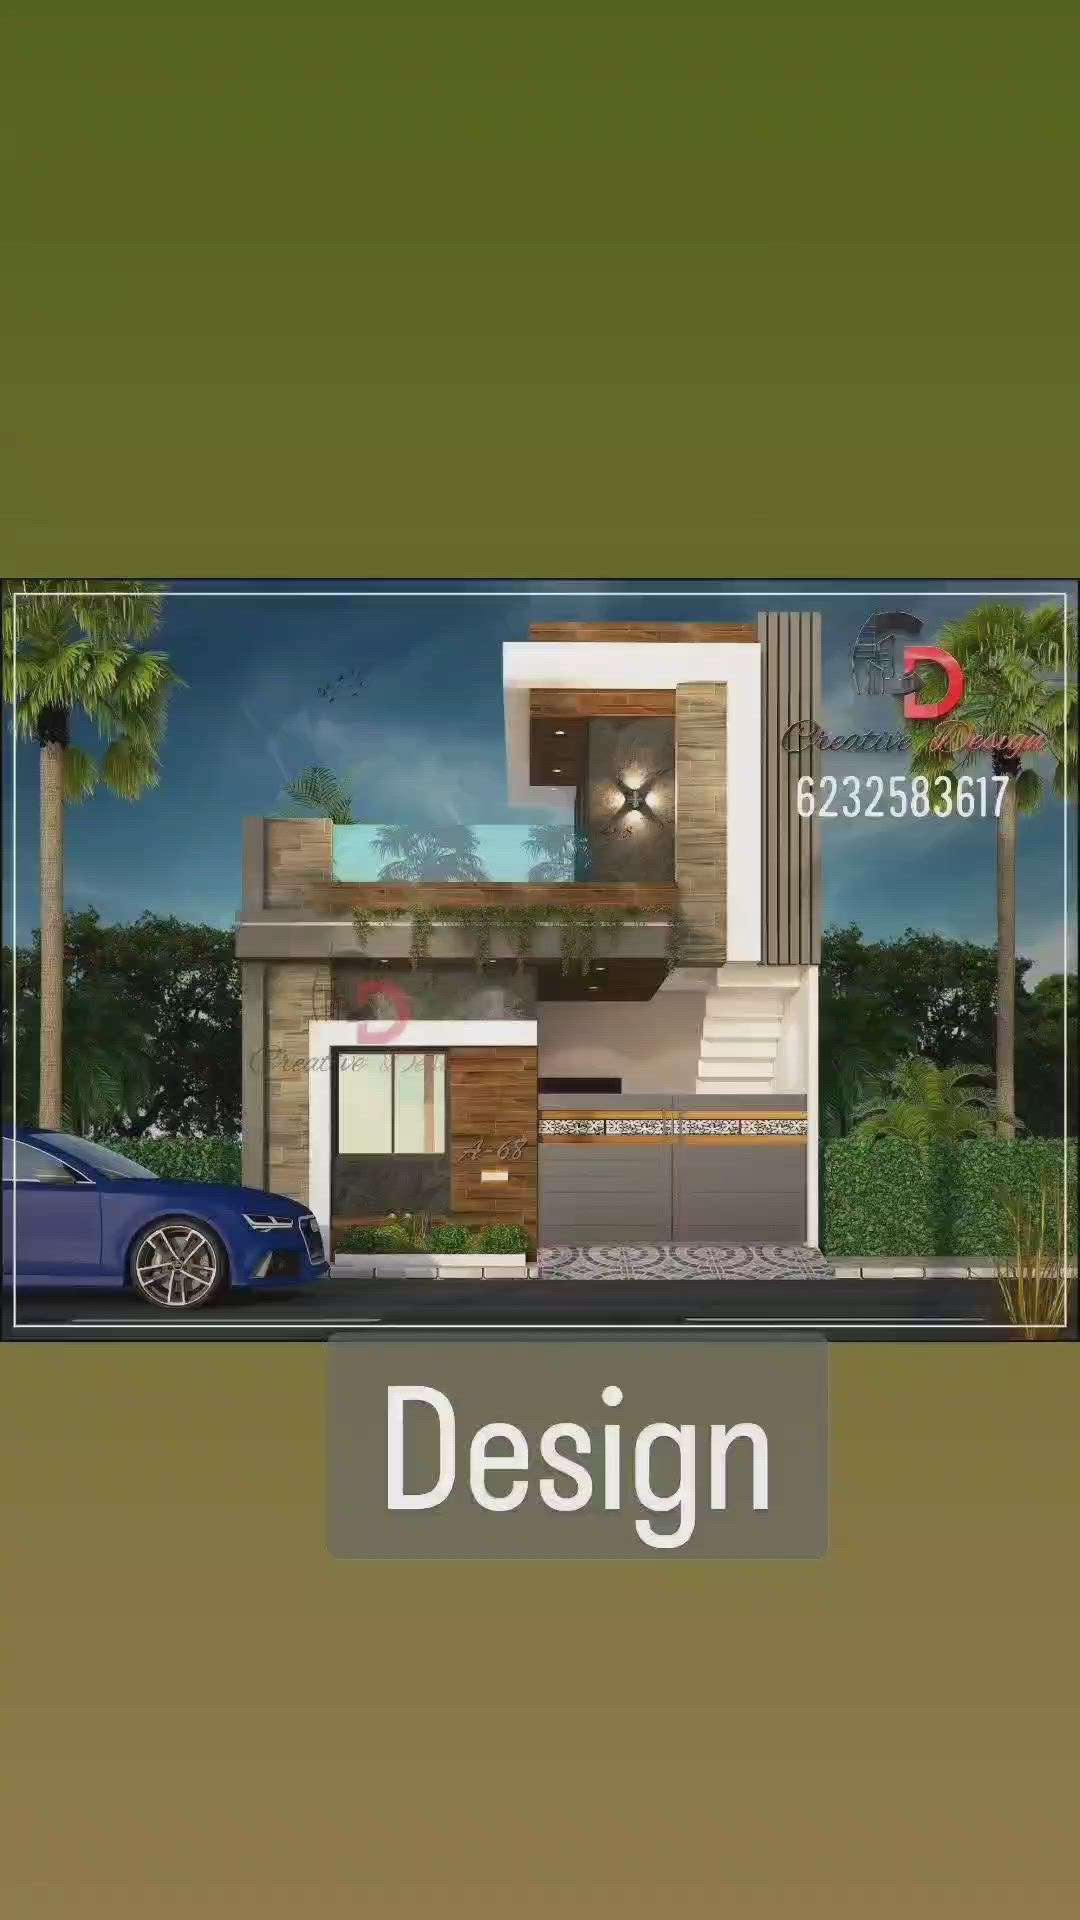 Elevation Design/ existing site
Contact CREATIVE DESIGN on +916232583617,+917223967525.
For ARCHITECTURAL(floor plan,3D Elevation,etc),STRUCTURAL(colom,beam designs,etc) & INTERIORE DESIGN.
At a very affordable prices & better services.
. 
. 
. 
. 
. 
. 
. 
. 
. 
#elevation #architecture #design #love #interiordesign #motivation #u #d #architect #interior #construction #growth #empowerment #exteriordesign #art #selflove #home #architecturedesign #building #exterior #worship #inspiration #architecturelovers #ınstagood